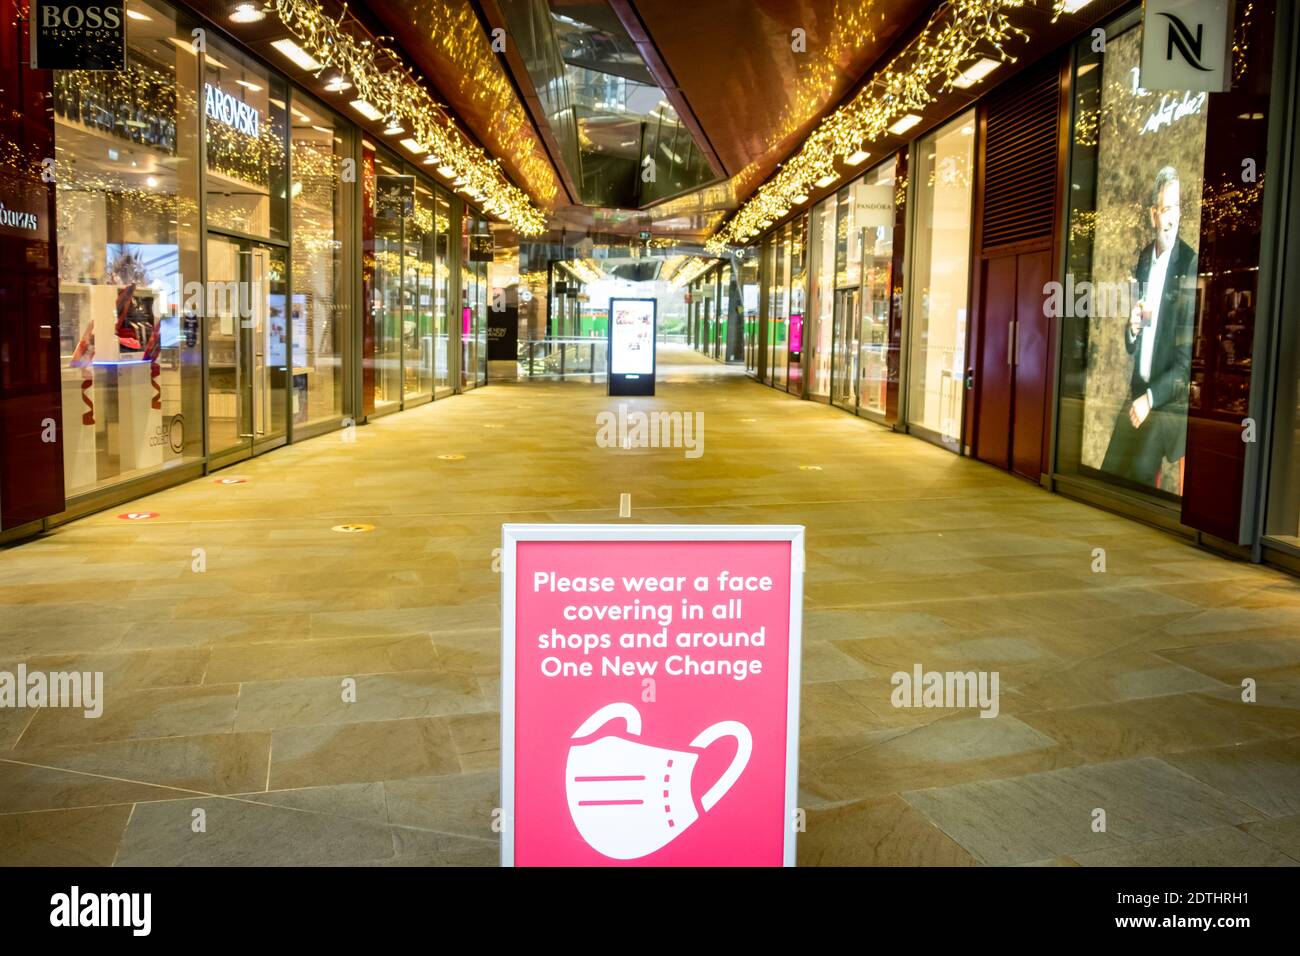 London- December 21, 2020:  Covid19 signage in empty New Change One shopping mall in central London a few days before Christmas in tier 4 lockdown Stock Photo